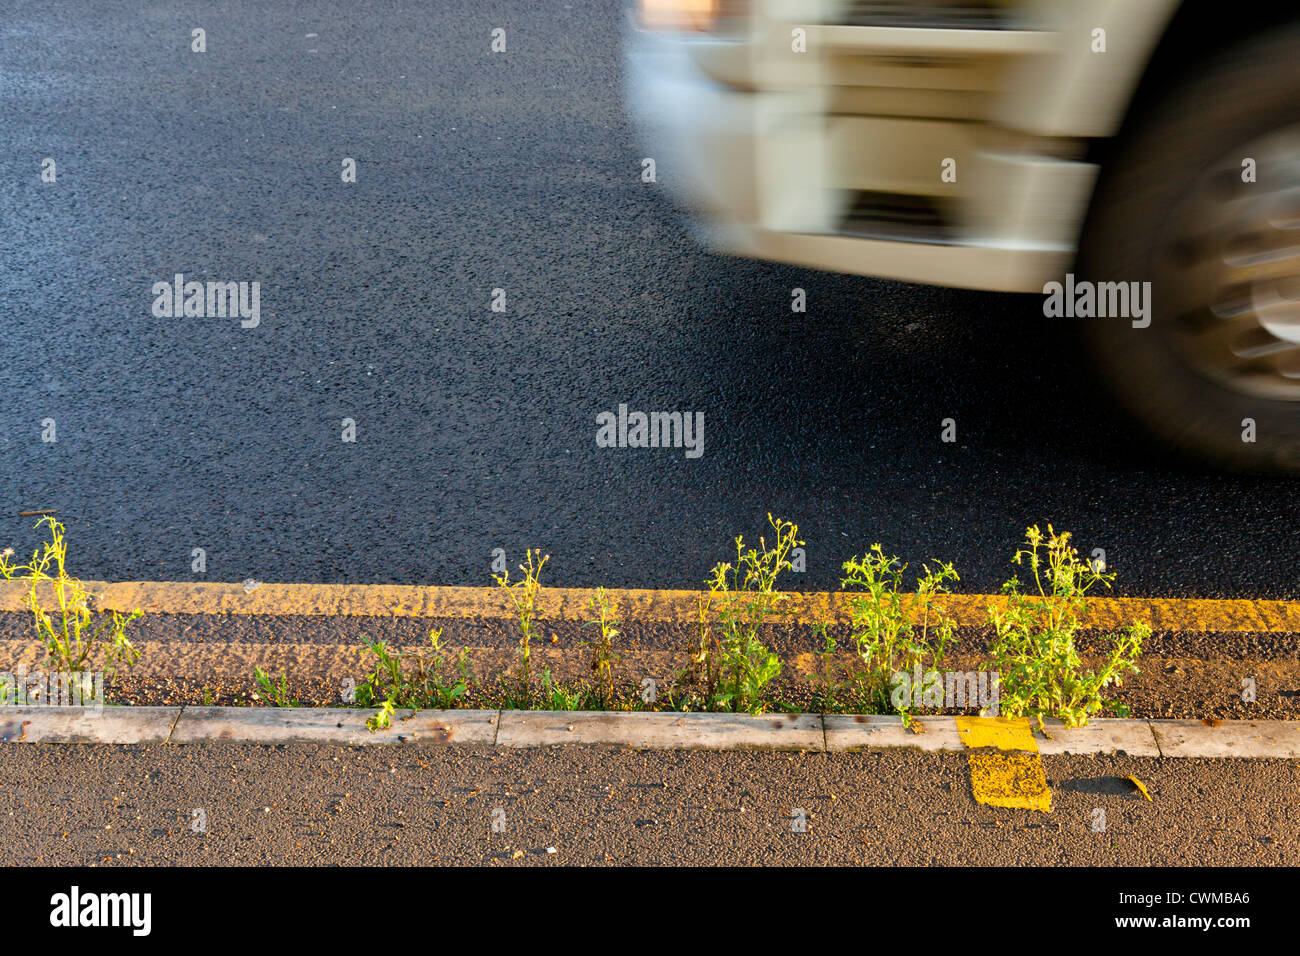 Kerbside weeds. Vehicle passing by on a main road with weed growing by the kerb, England, UK Stock Photo